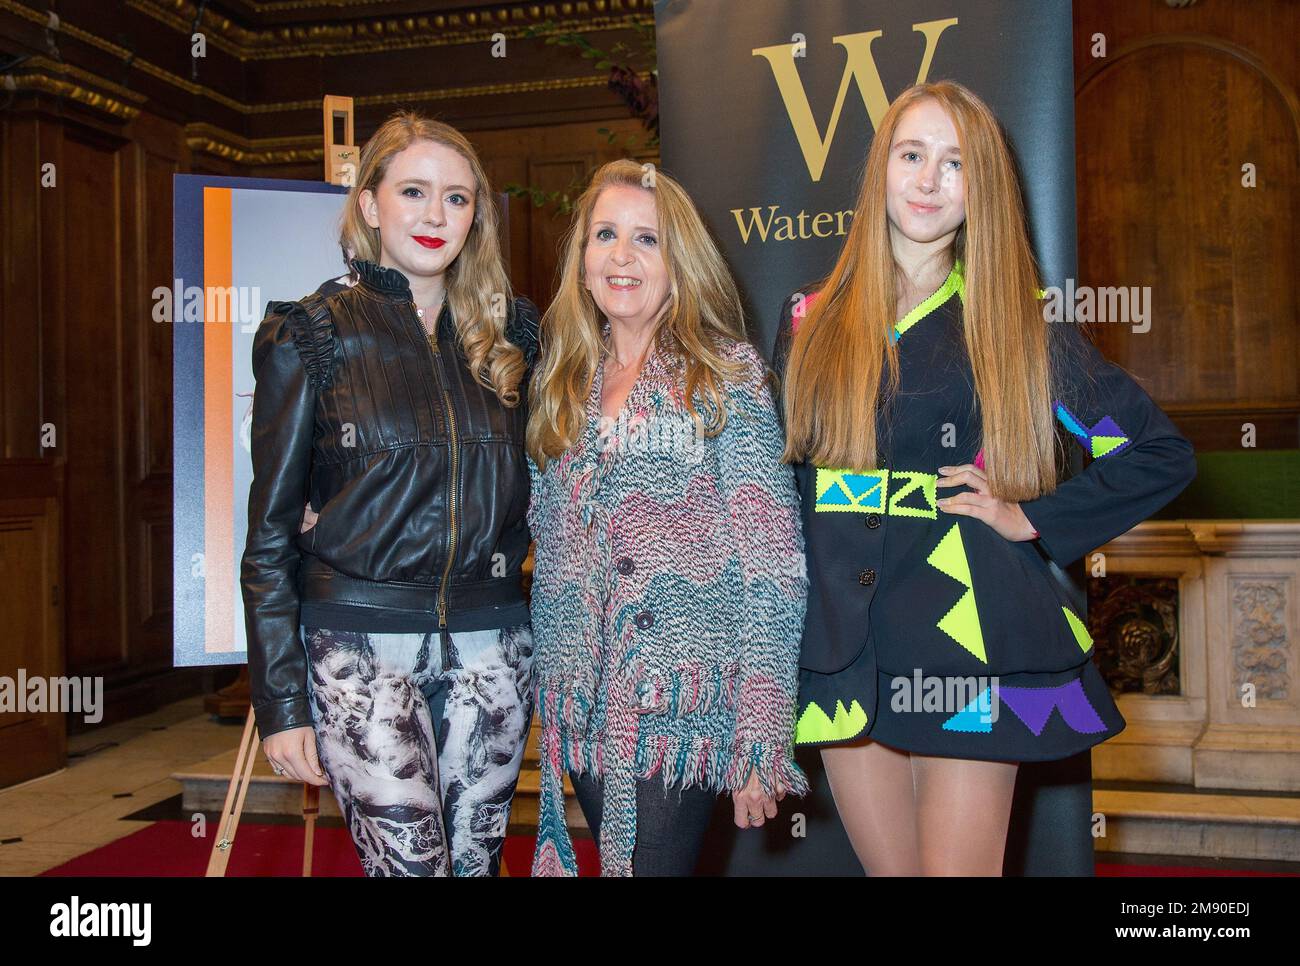 London, UK. 14 October, 2016.  Gillian McKeith (C) poses with daughters Skylar McKeith-Magaziner and Afton McKeith-Magaziner at An Evening With Vivienne Westwood discussing her new book 'Get A Life! The Diaries Of Vivienne Westwood' at St James' Church on October 14, 2016 in London, England. Credit: S.A.M./Alamy Live News Stock Photo